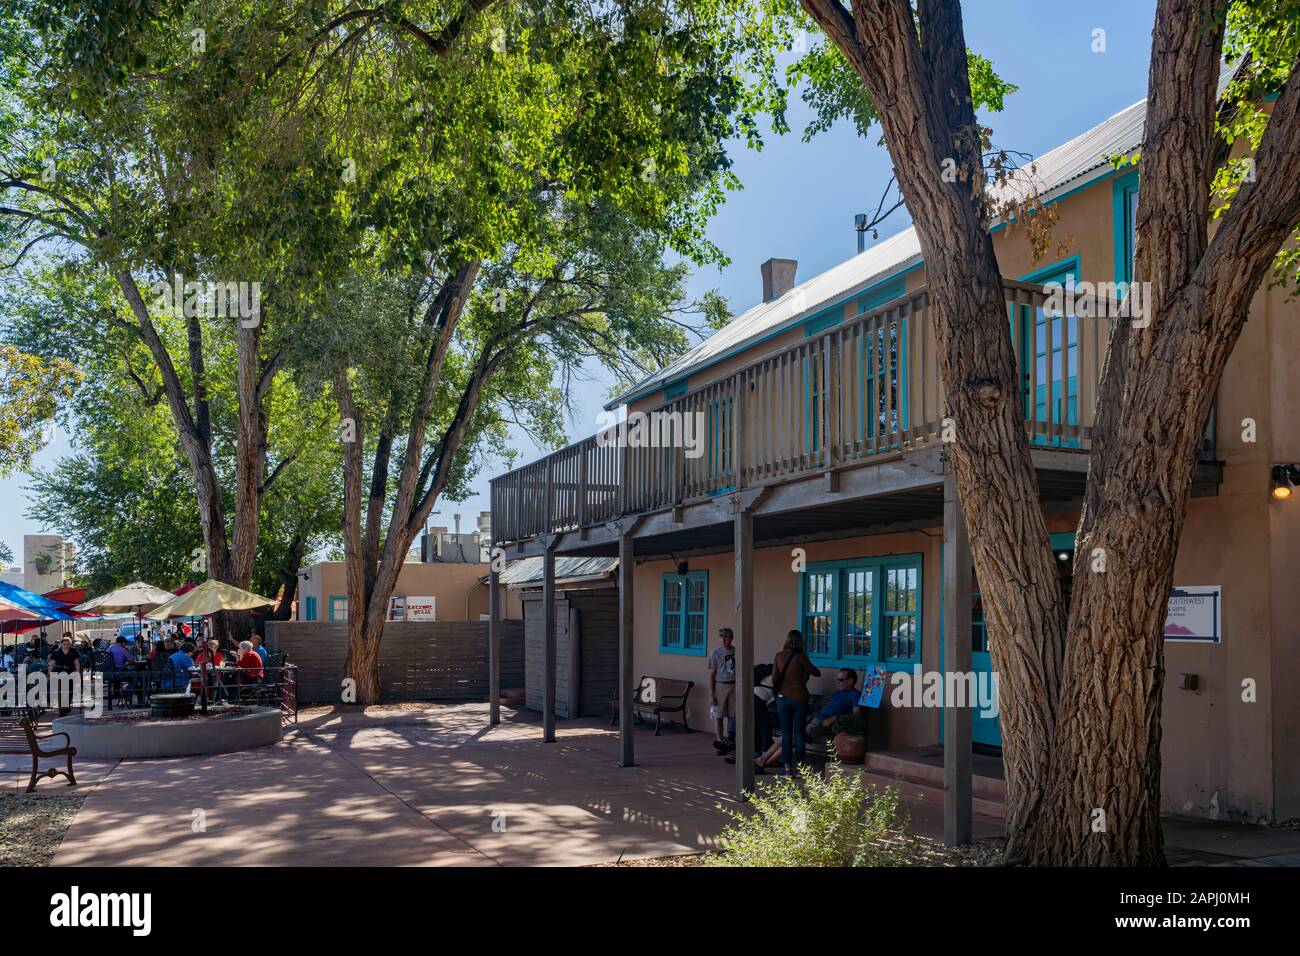 Albuquerque, OCT 5: Exterior view of some stores in the Old Town Plaza on OCT 5, 2019 at Albuquerque, New Mexico Stock Photo